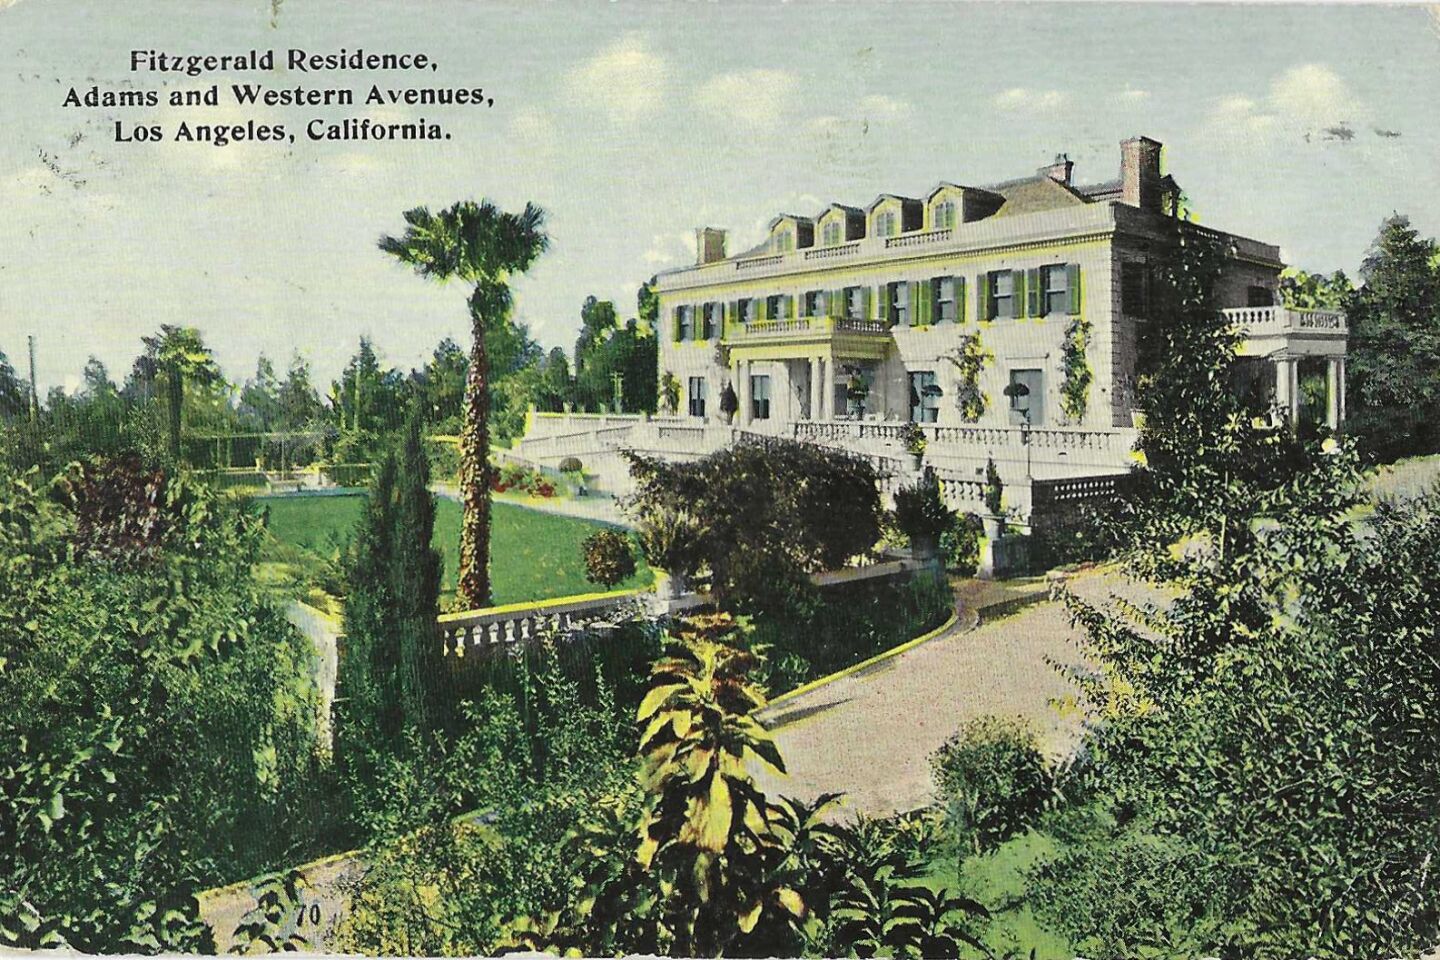 A home made of reinforced concrete commanded the northwest corner of then-West Adams Street and Western Avenue on a vintage postcard mailed in 1912. Today, that corner is home to a retirement housing and assisted living complex. Theda Bara, a silent screen star, rented this home briefly in 1918.